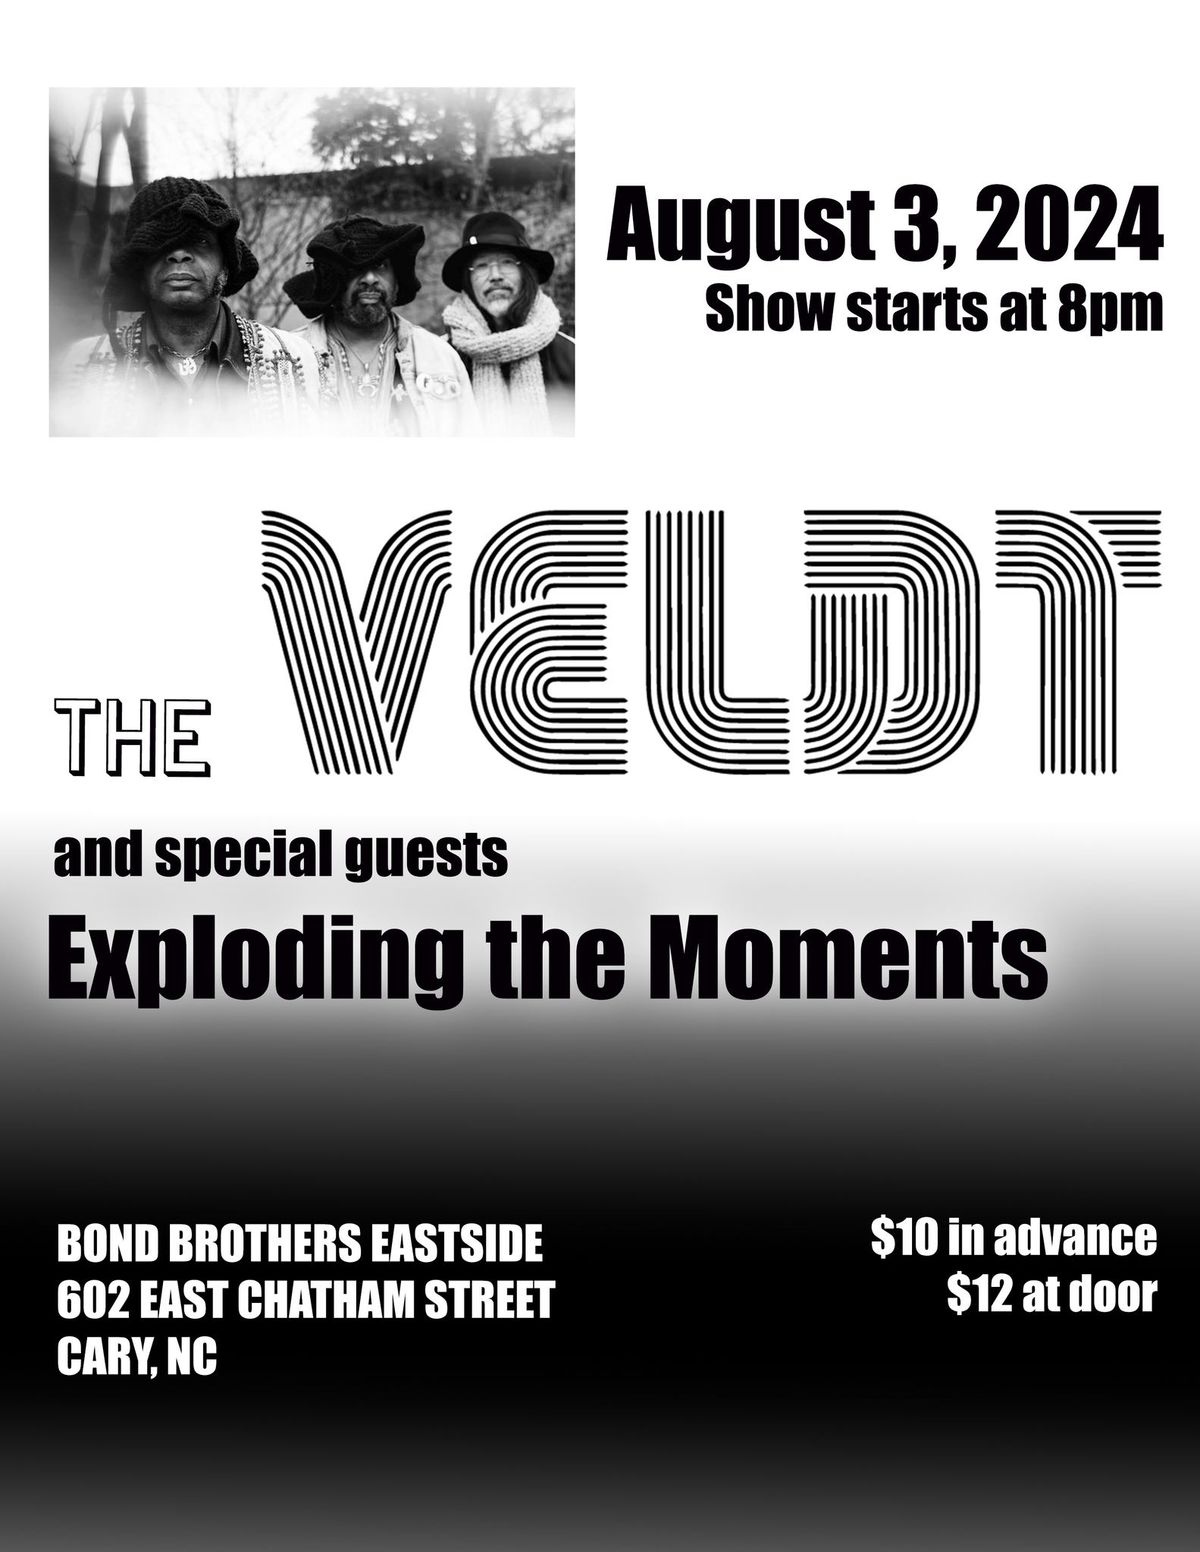 An amazing night of shoegaze with The Veldt and Exploding the Moments